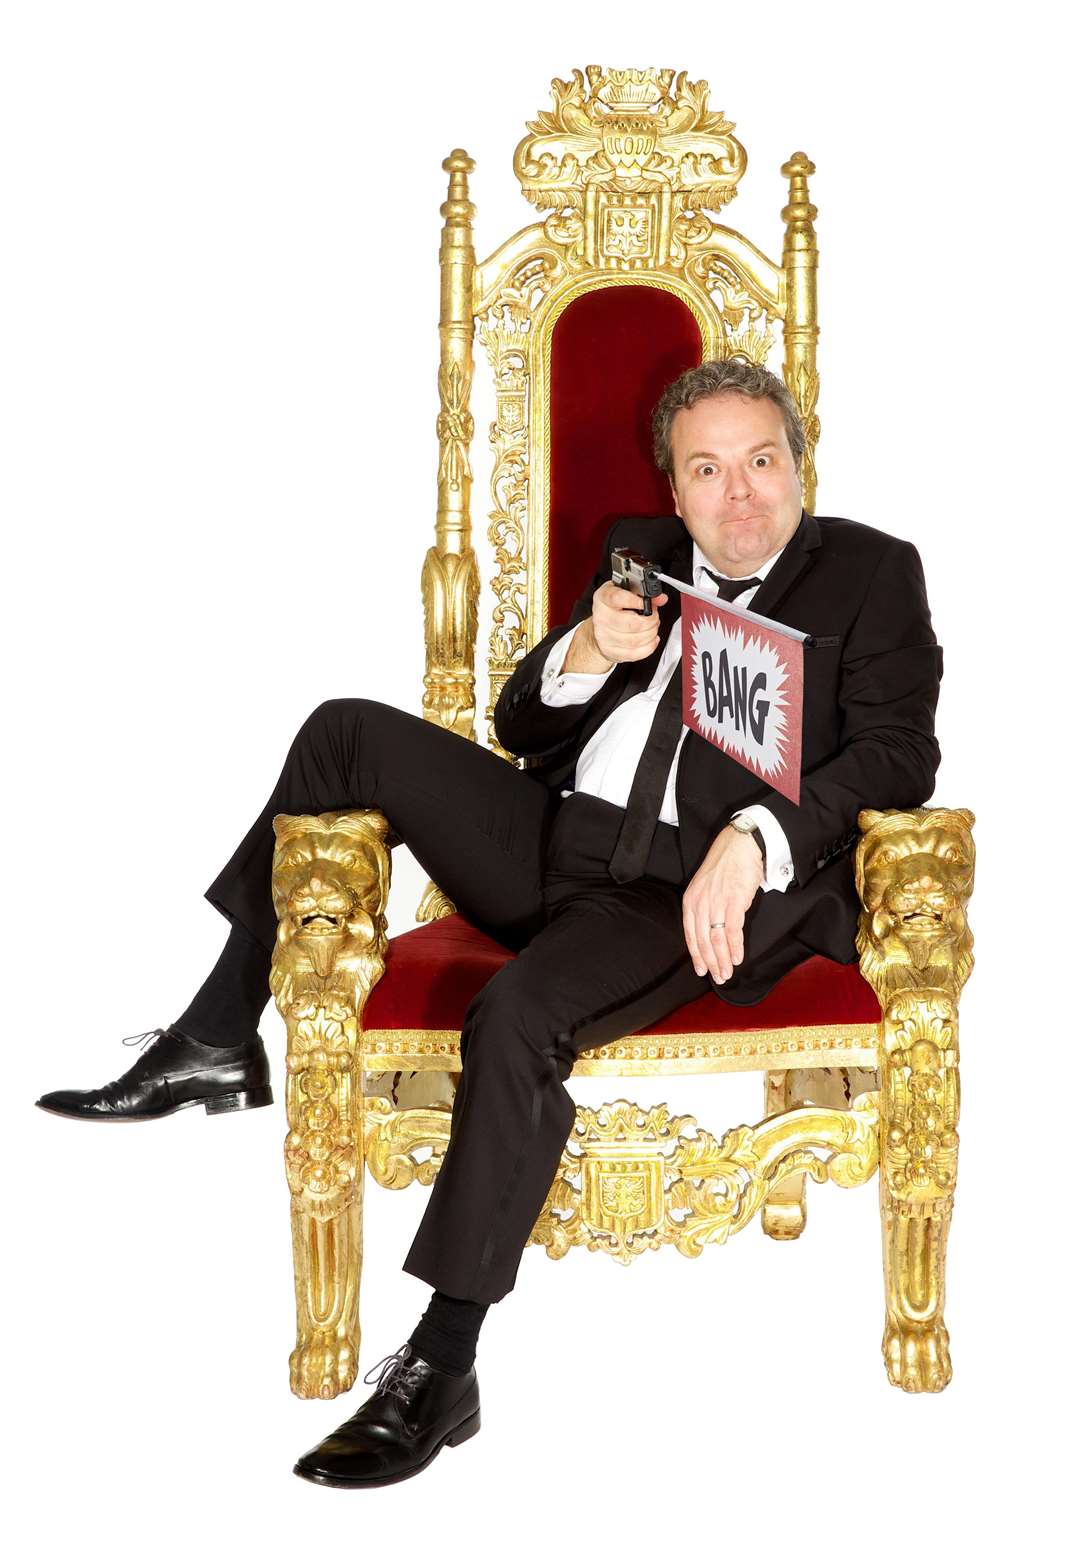 Hal Cruttenden will be at the Kent Comedy Festival